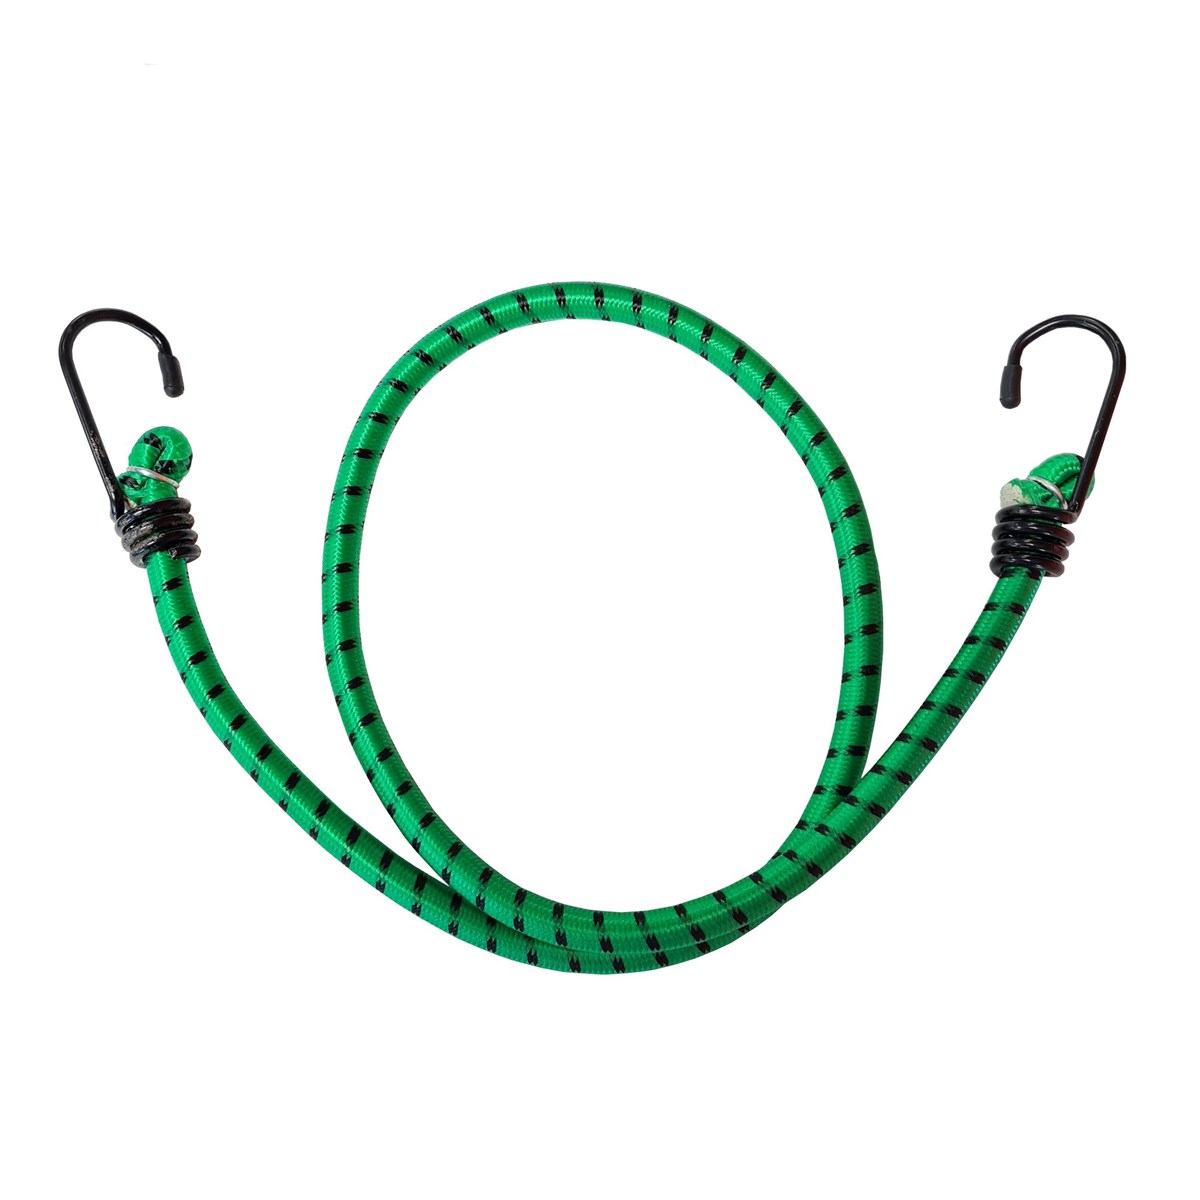 Bungee Straps Pair of 750mm Bungee Strap Green